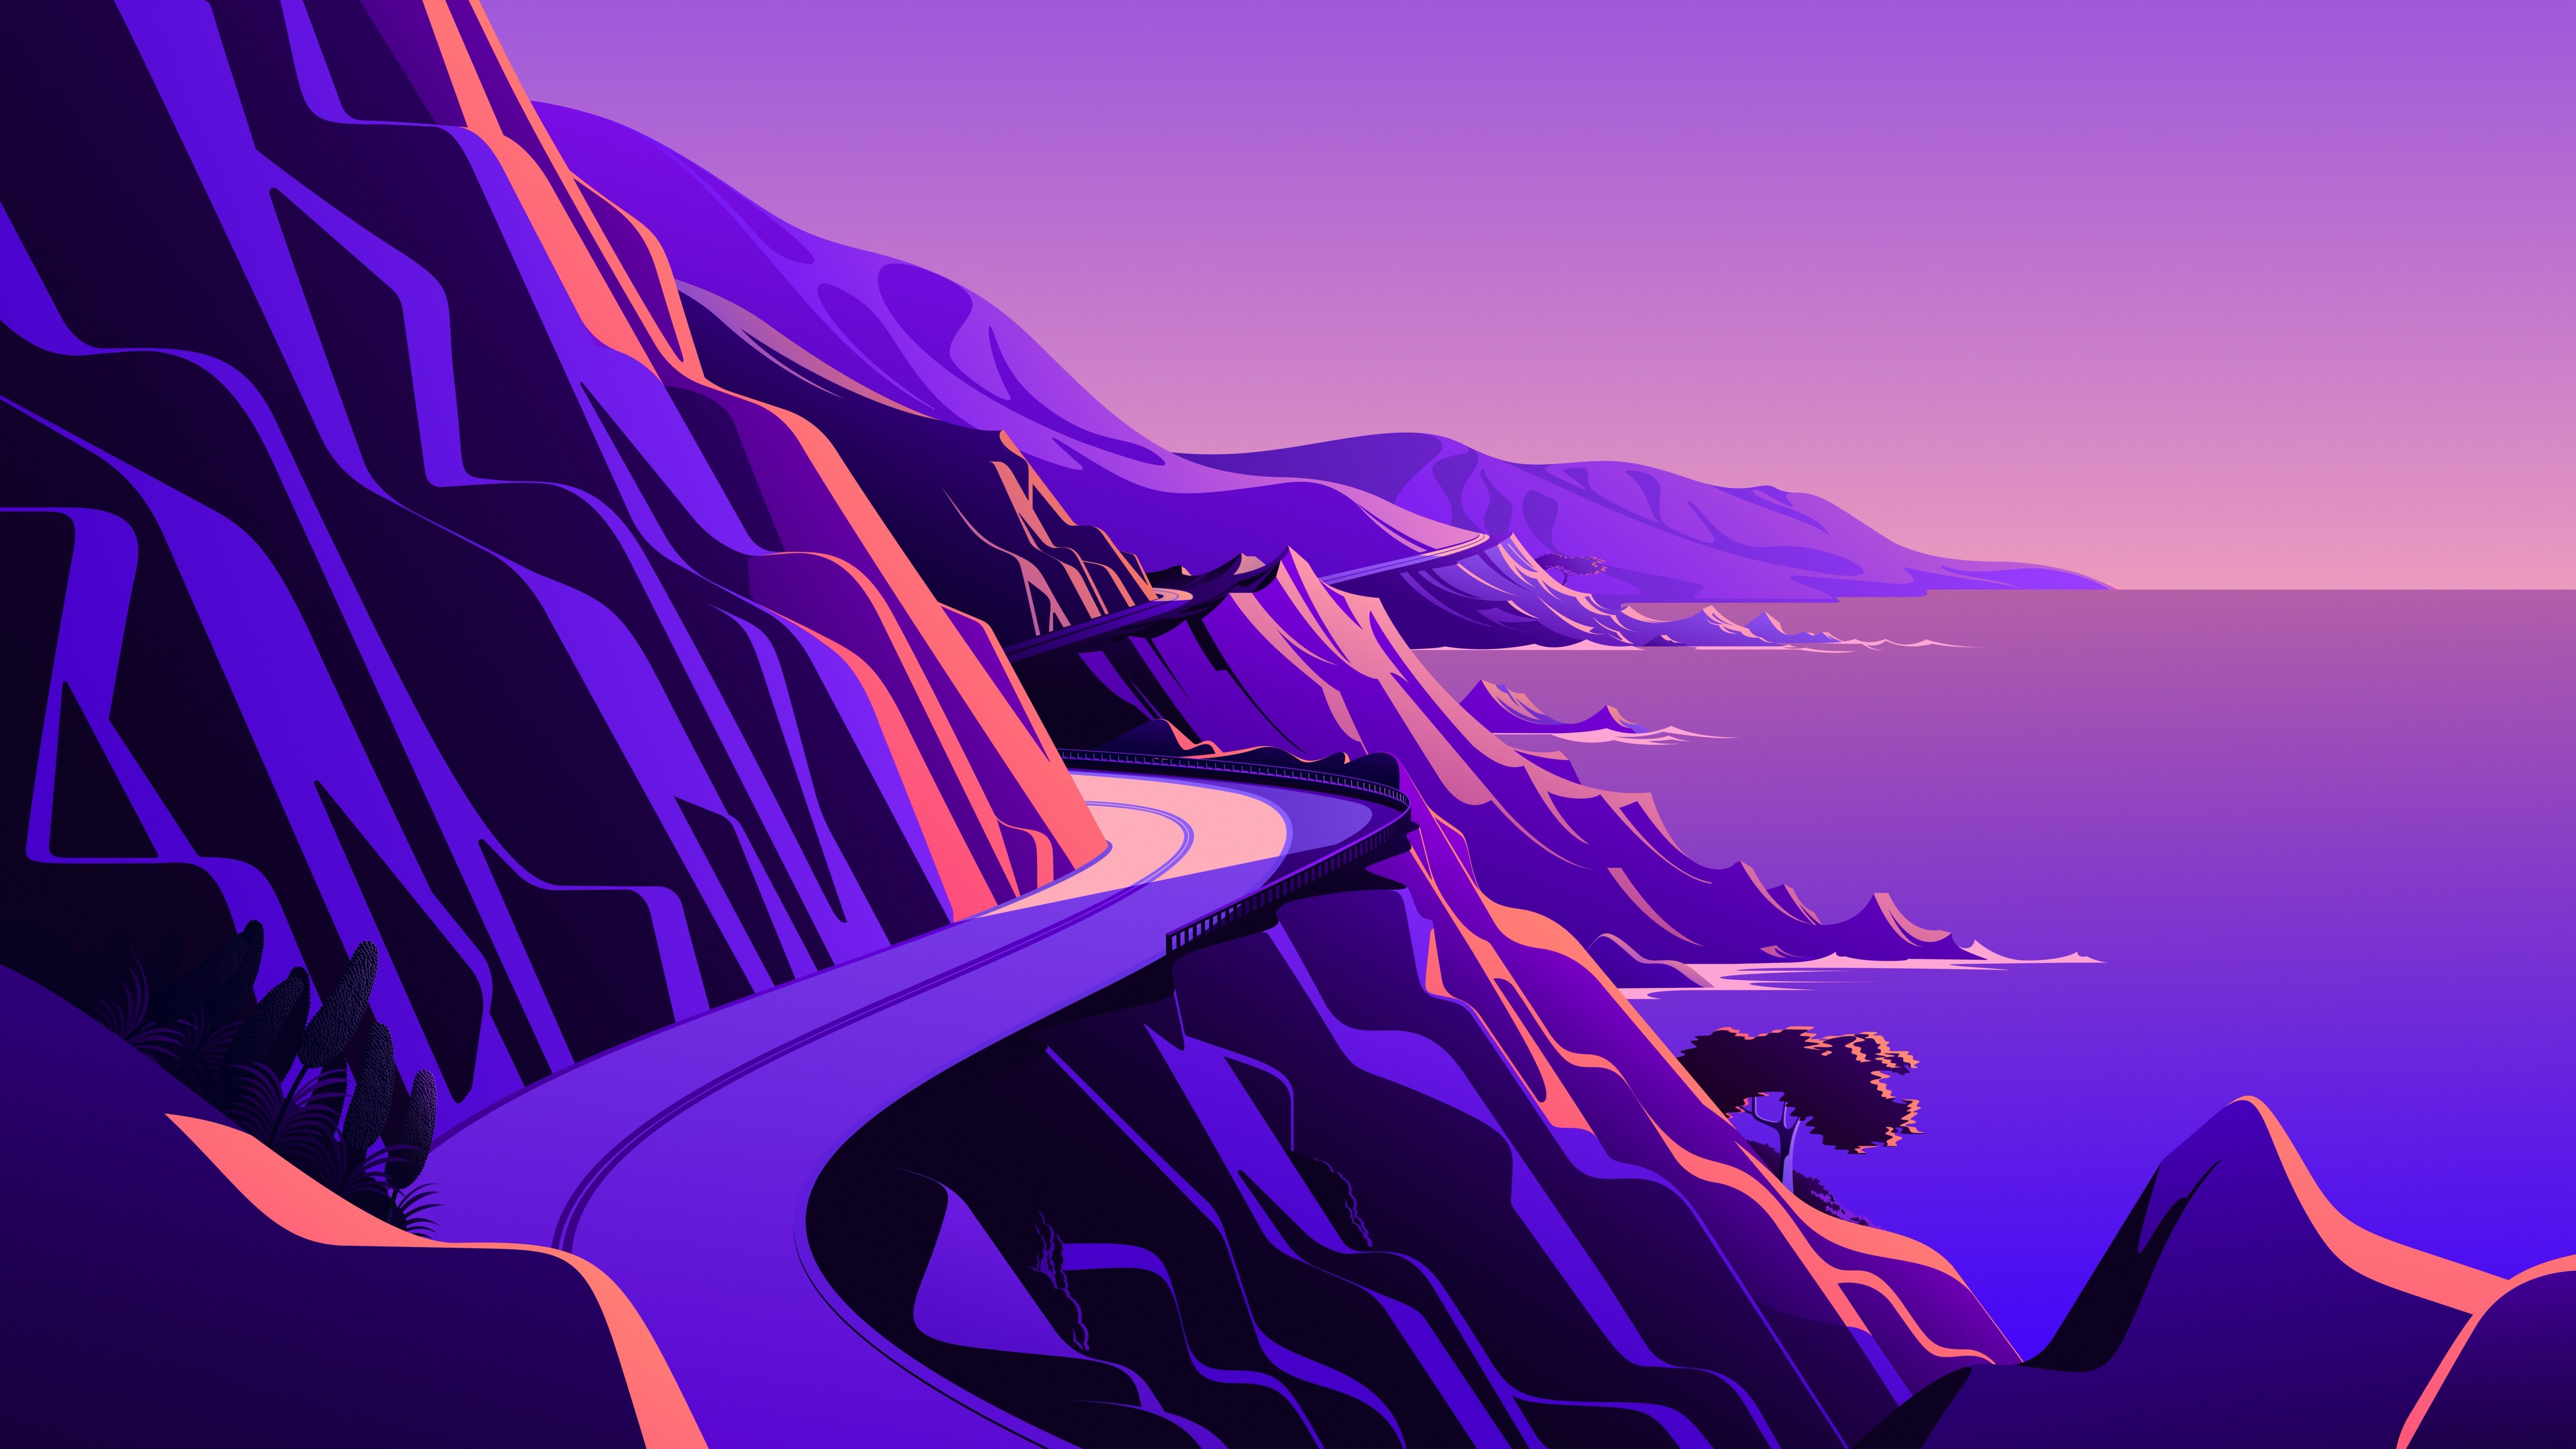 A digital painting of a winding road on a cliffside - Road, vector, mountain